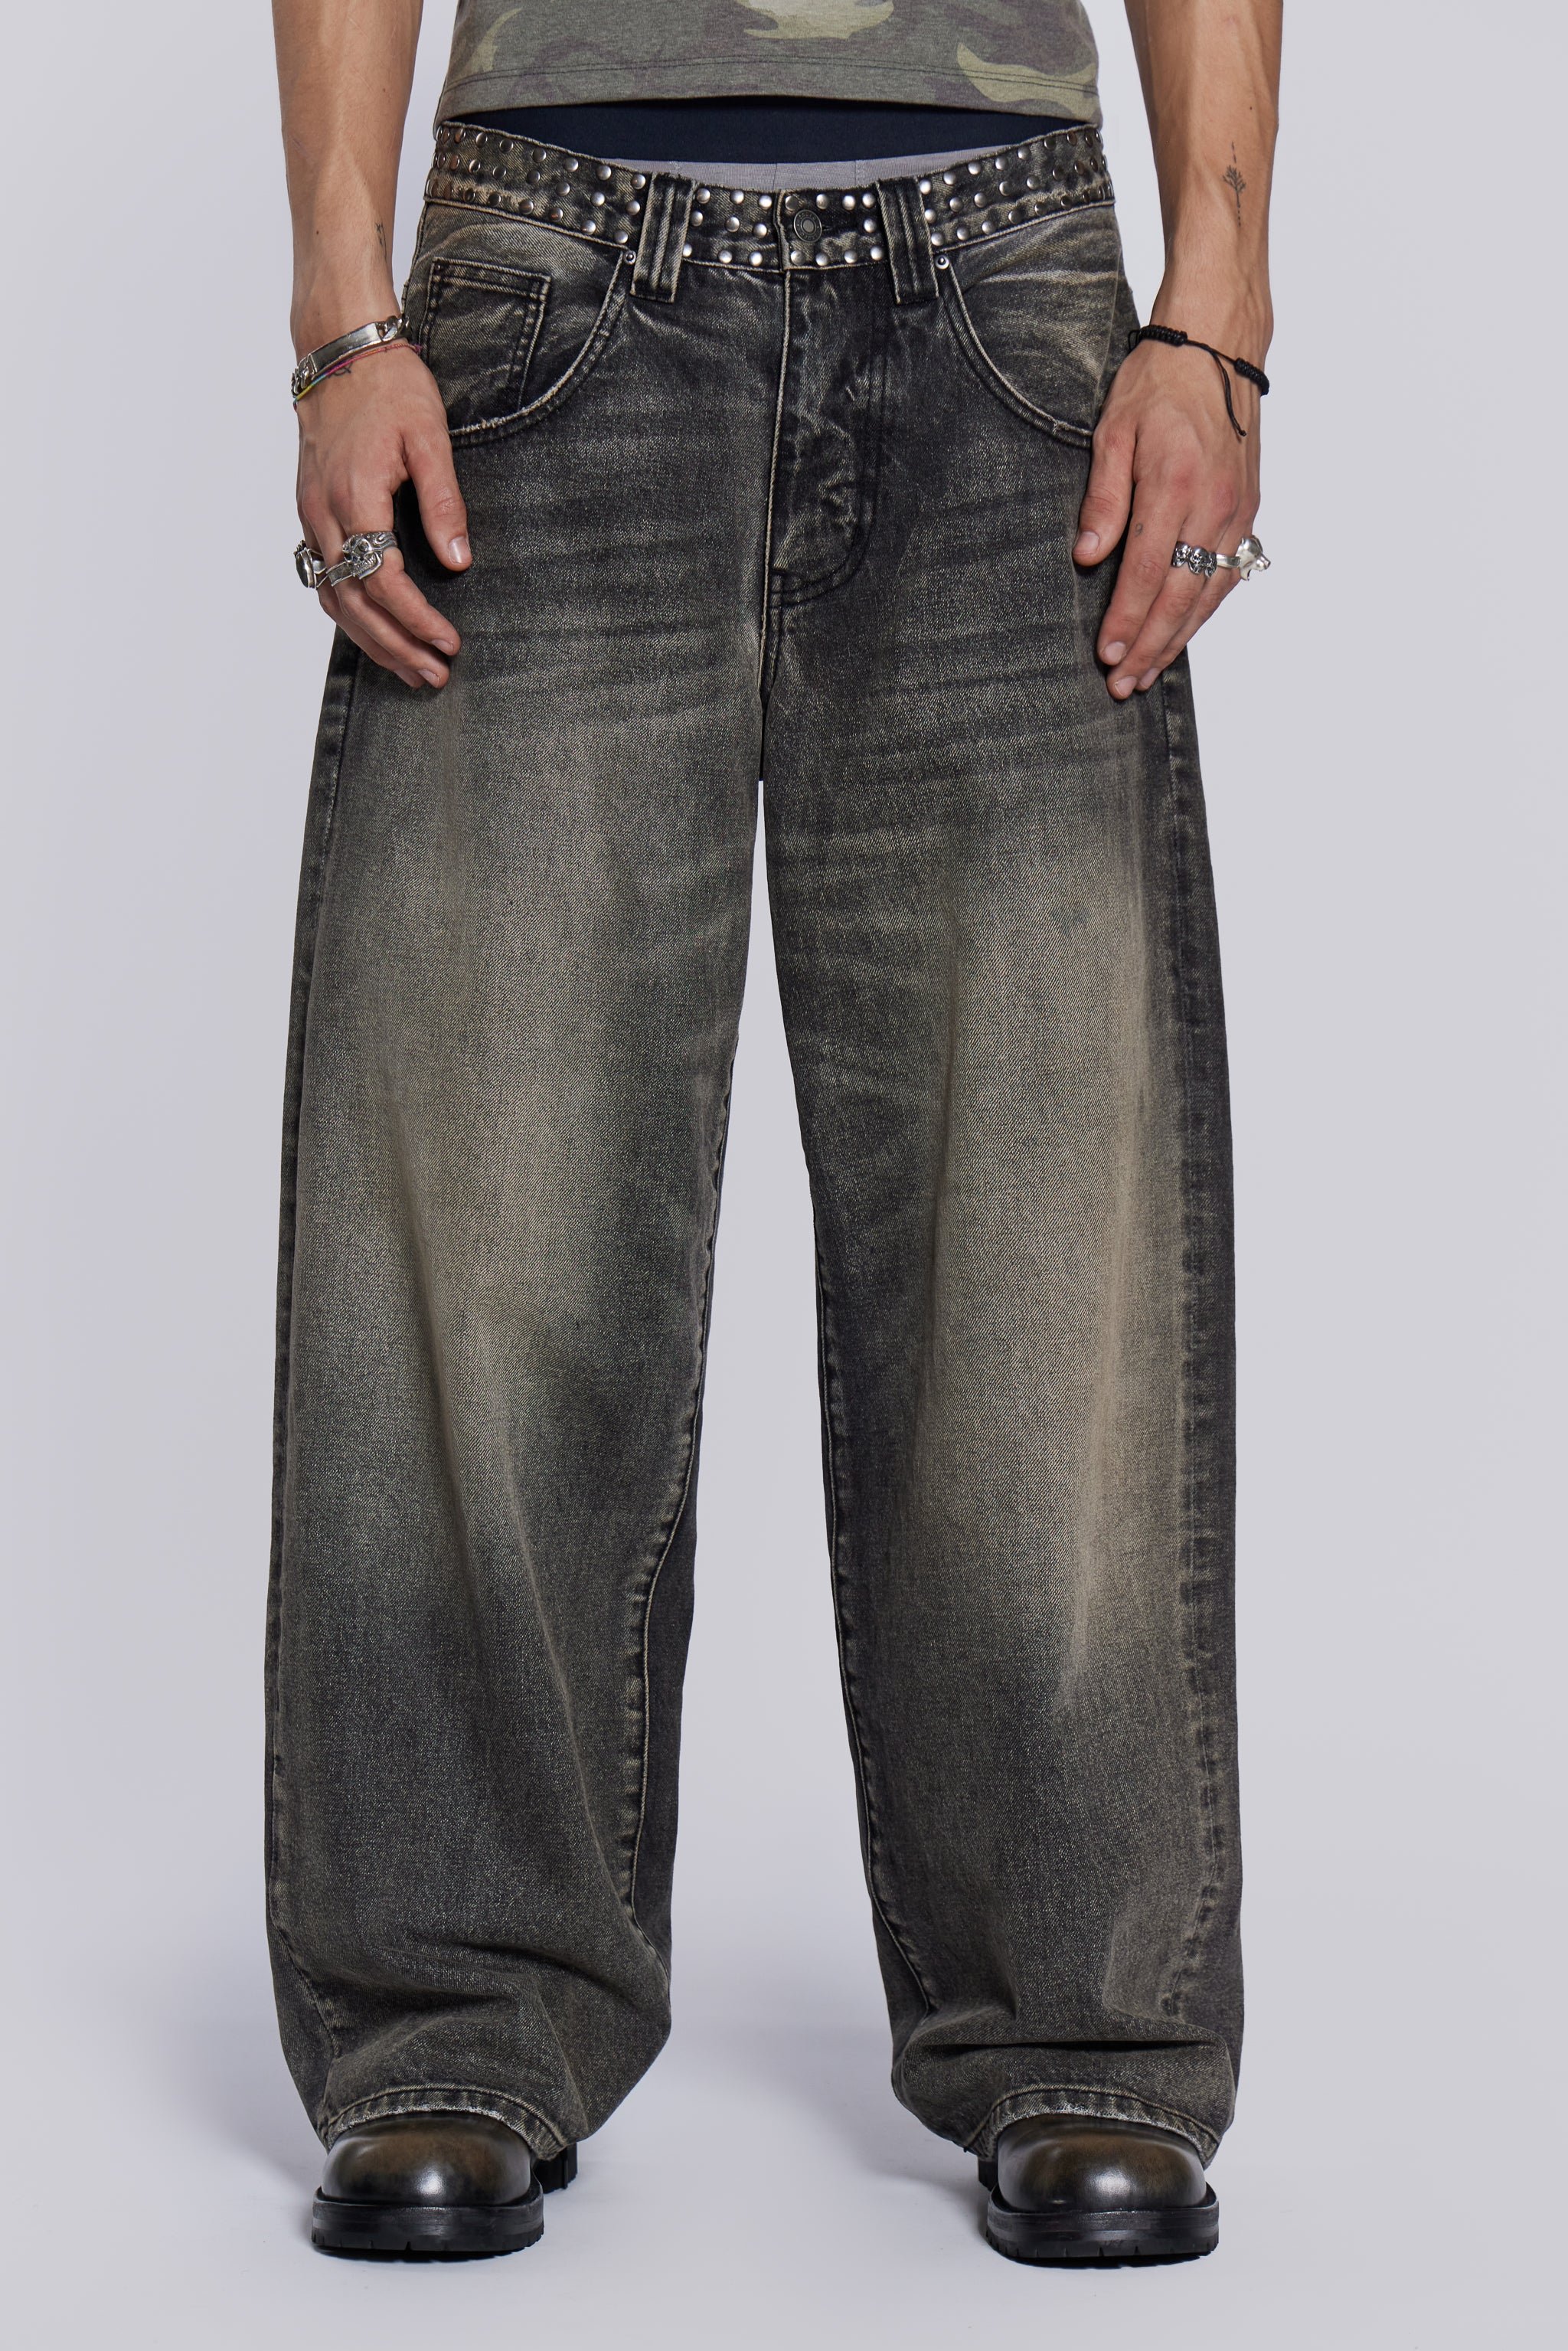 Washed Black Stud Colossus Jeans | Jaded London